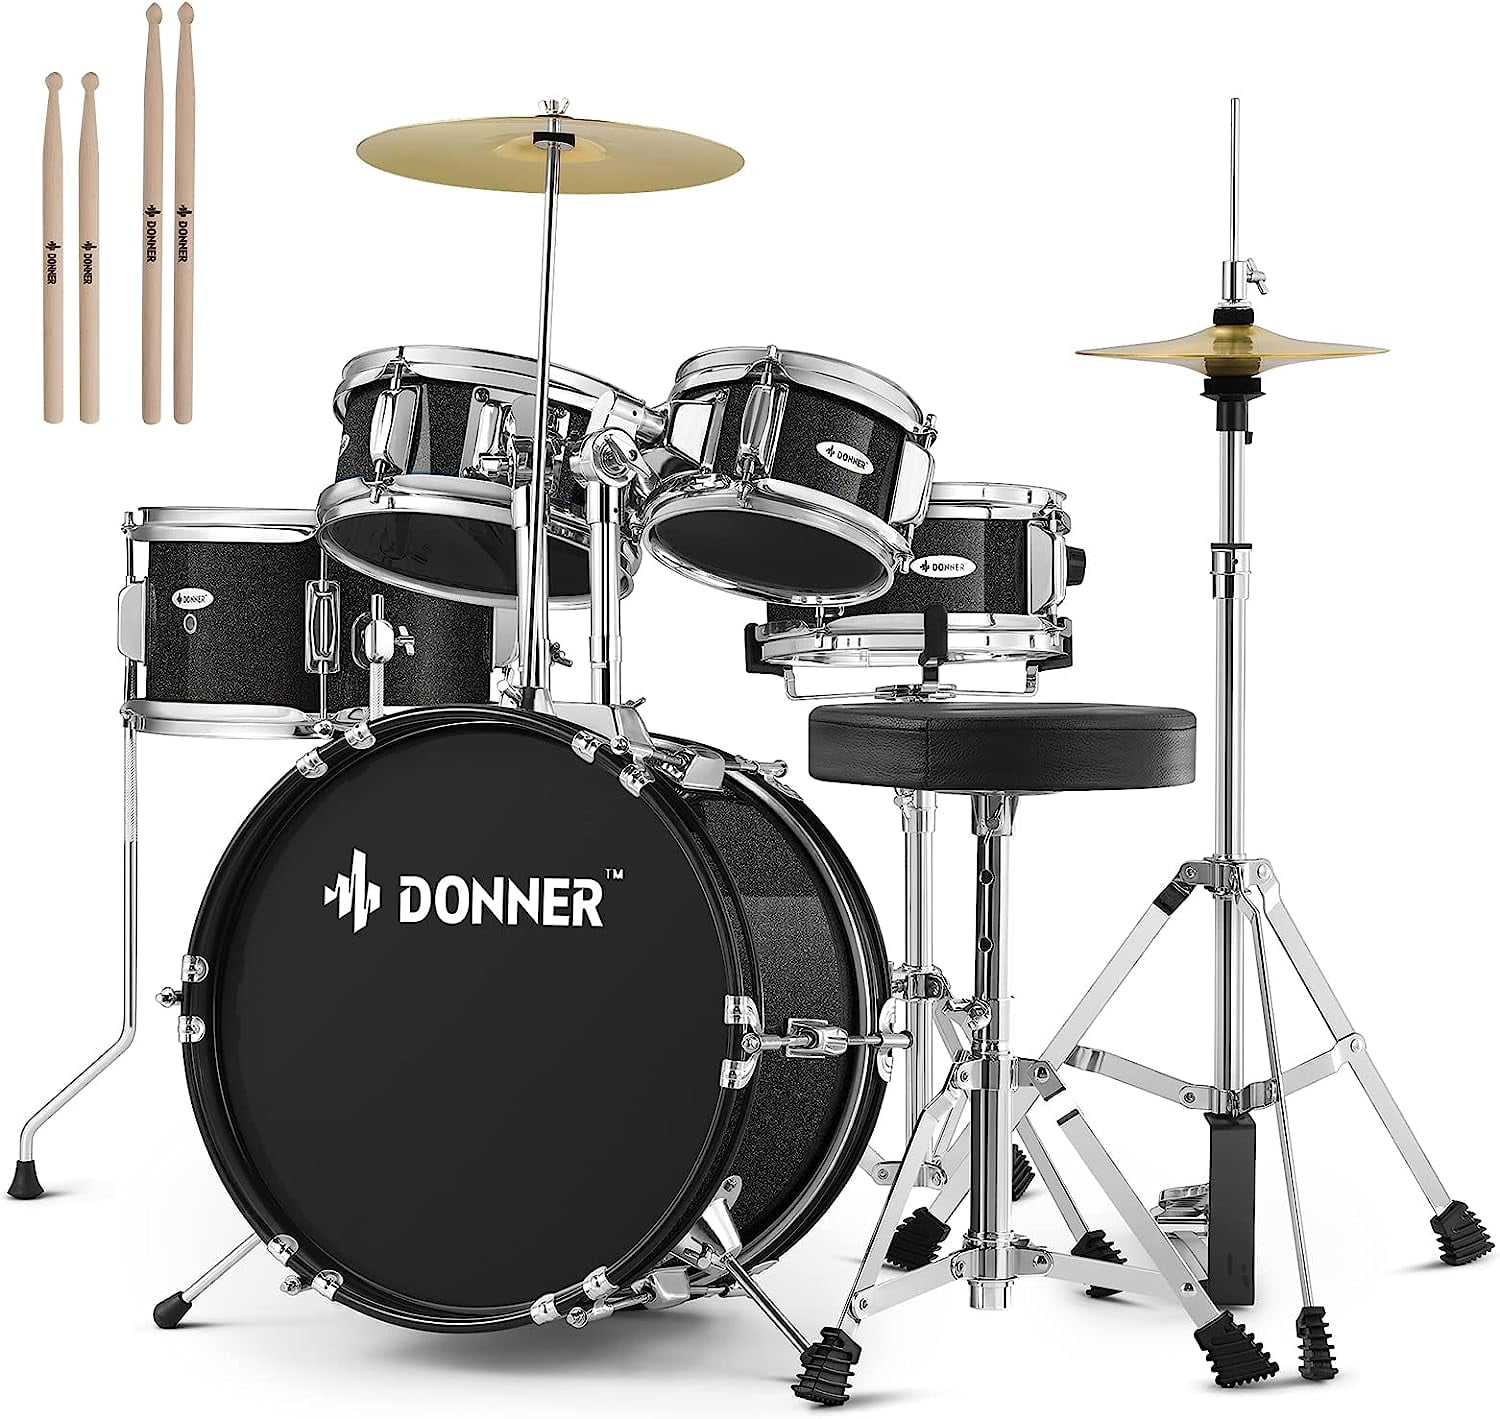 Donner Kids Beginner Junior Size Drum Set, Small 14" 5-Piece Percussion Instrument Kit for Starter, Practice, Learning, Musical Enlightenment Toys, Black